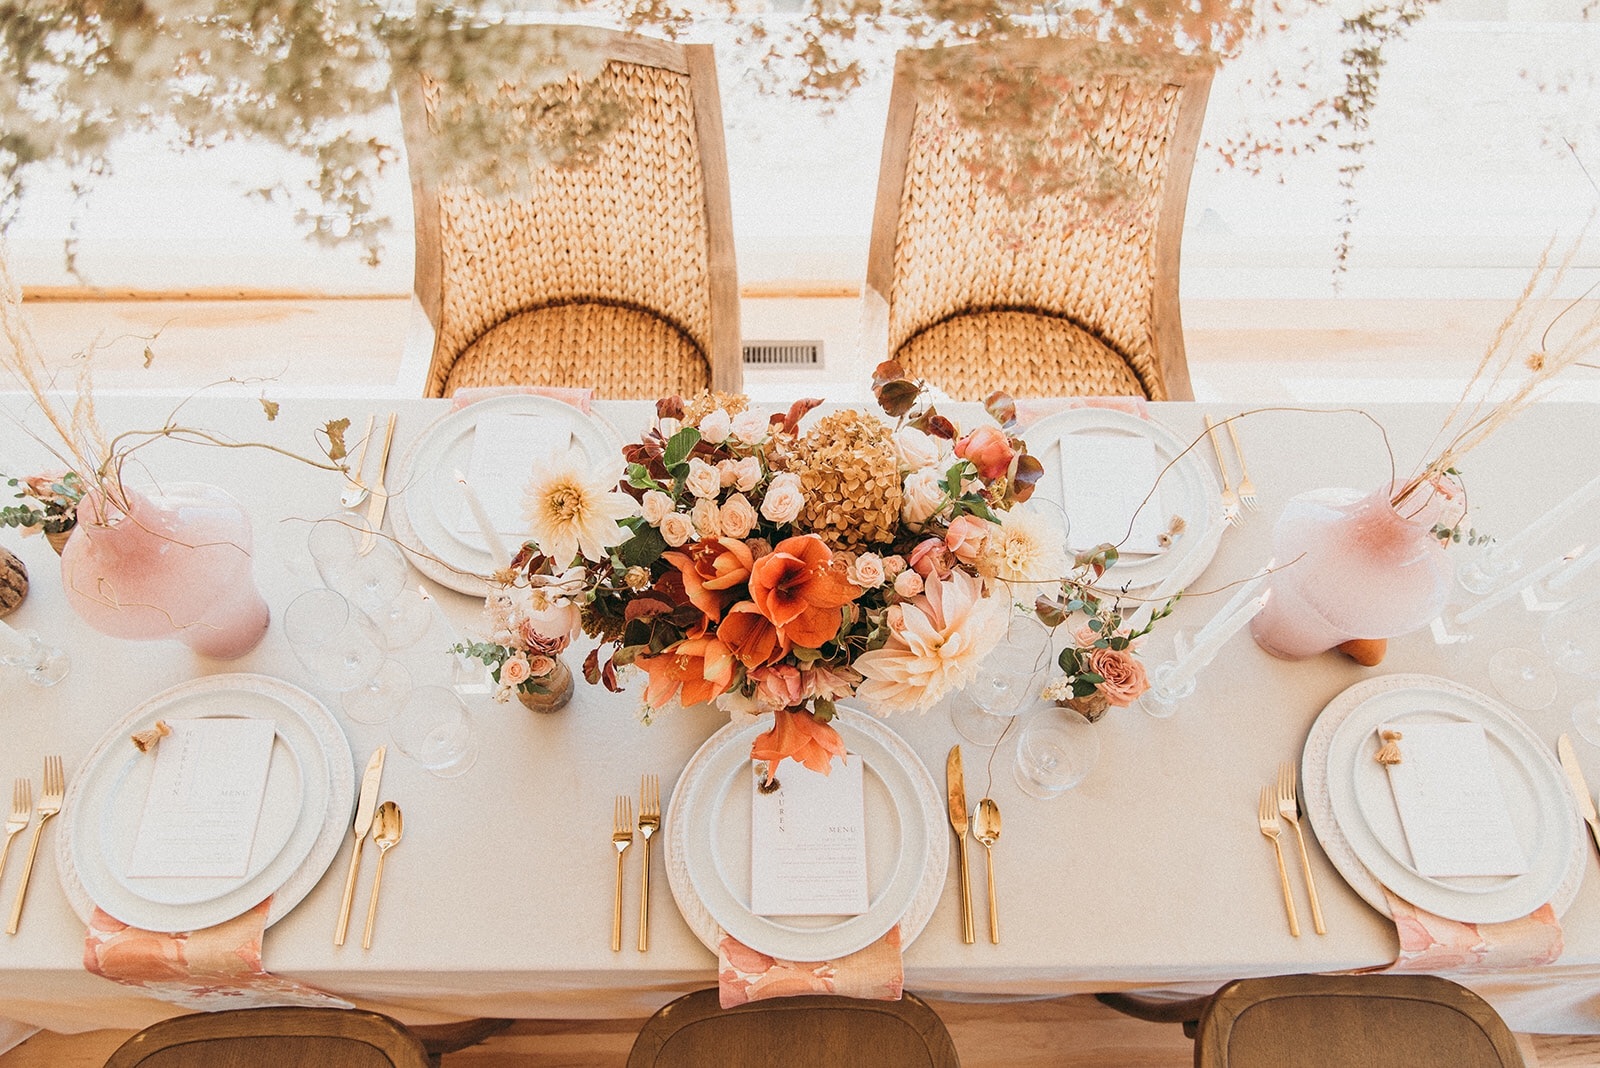 An Autumn wedding tablescape in shades of gold, burnt orange and rust